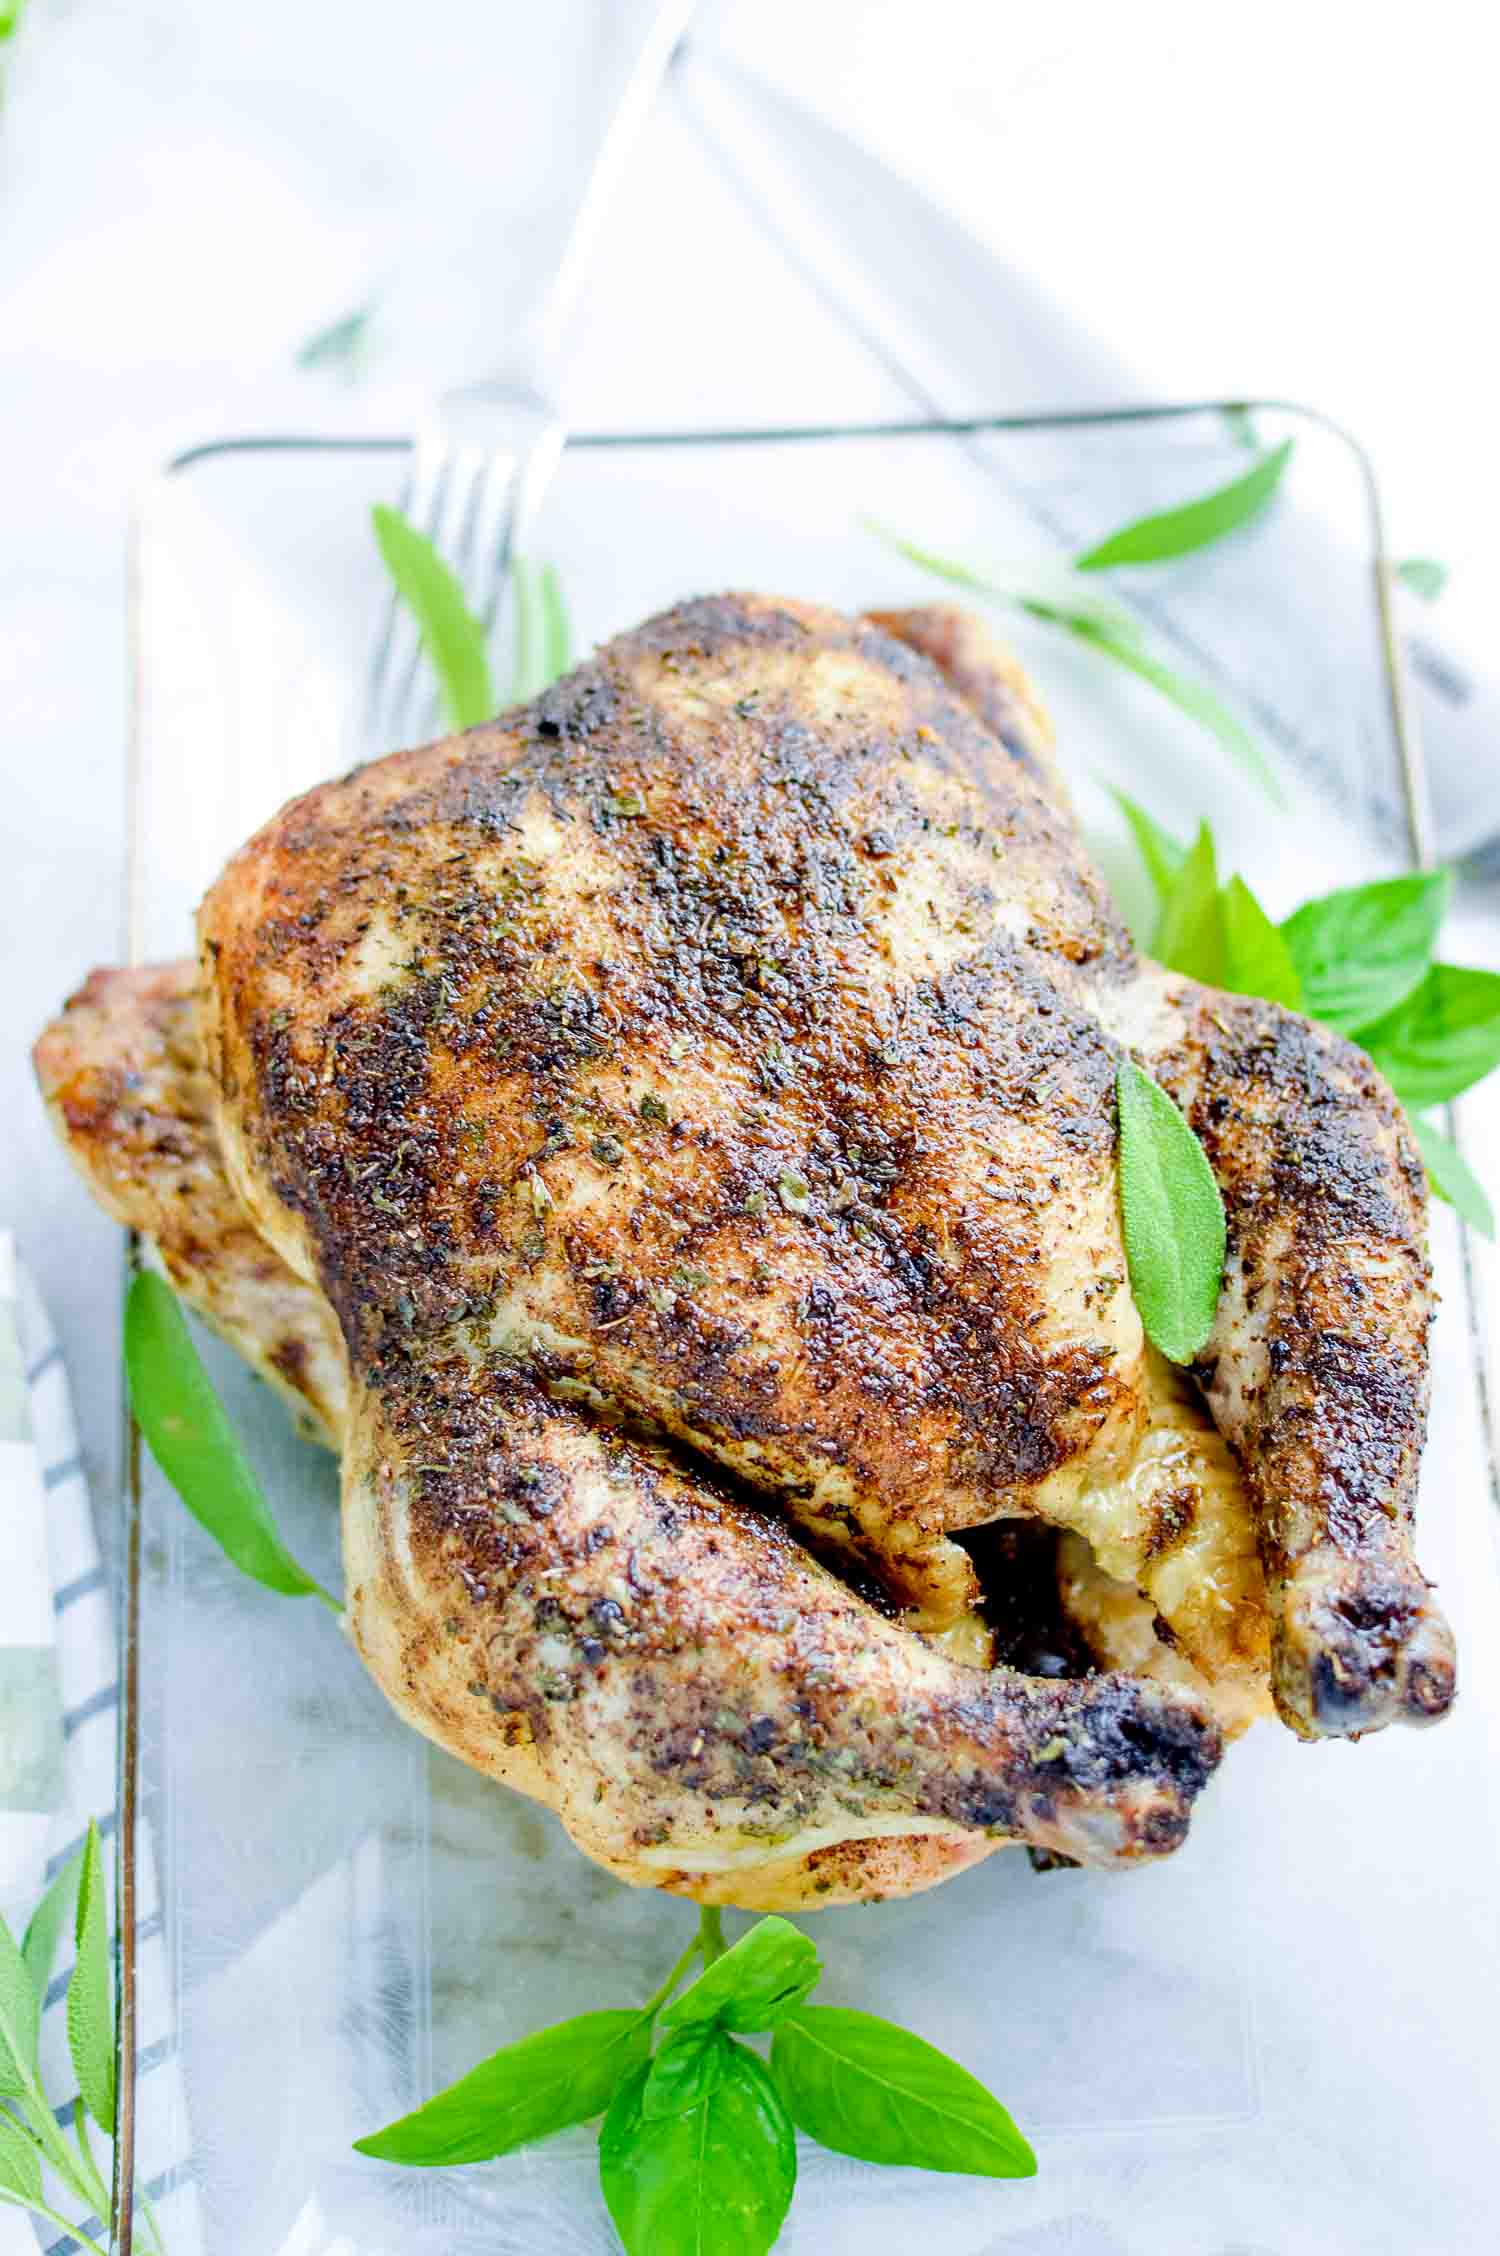 A whole roasted chicken on a clear tray with a metal knife and green herbs around it.